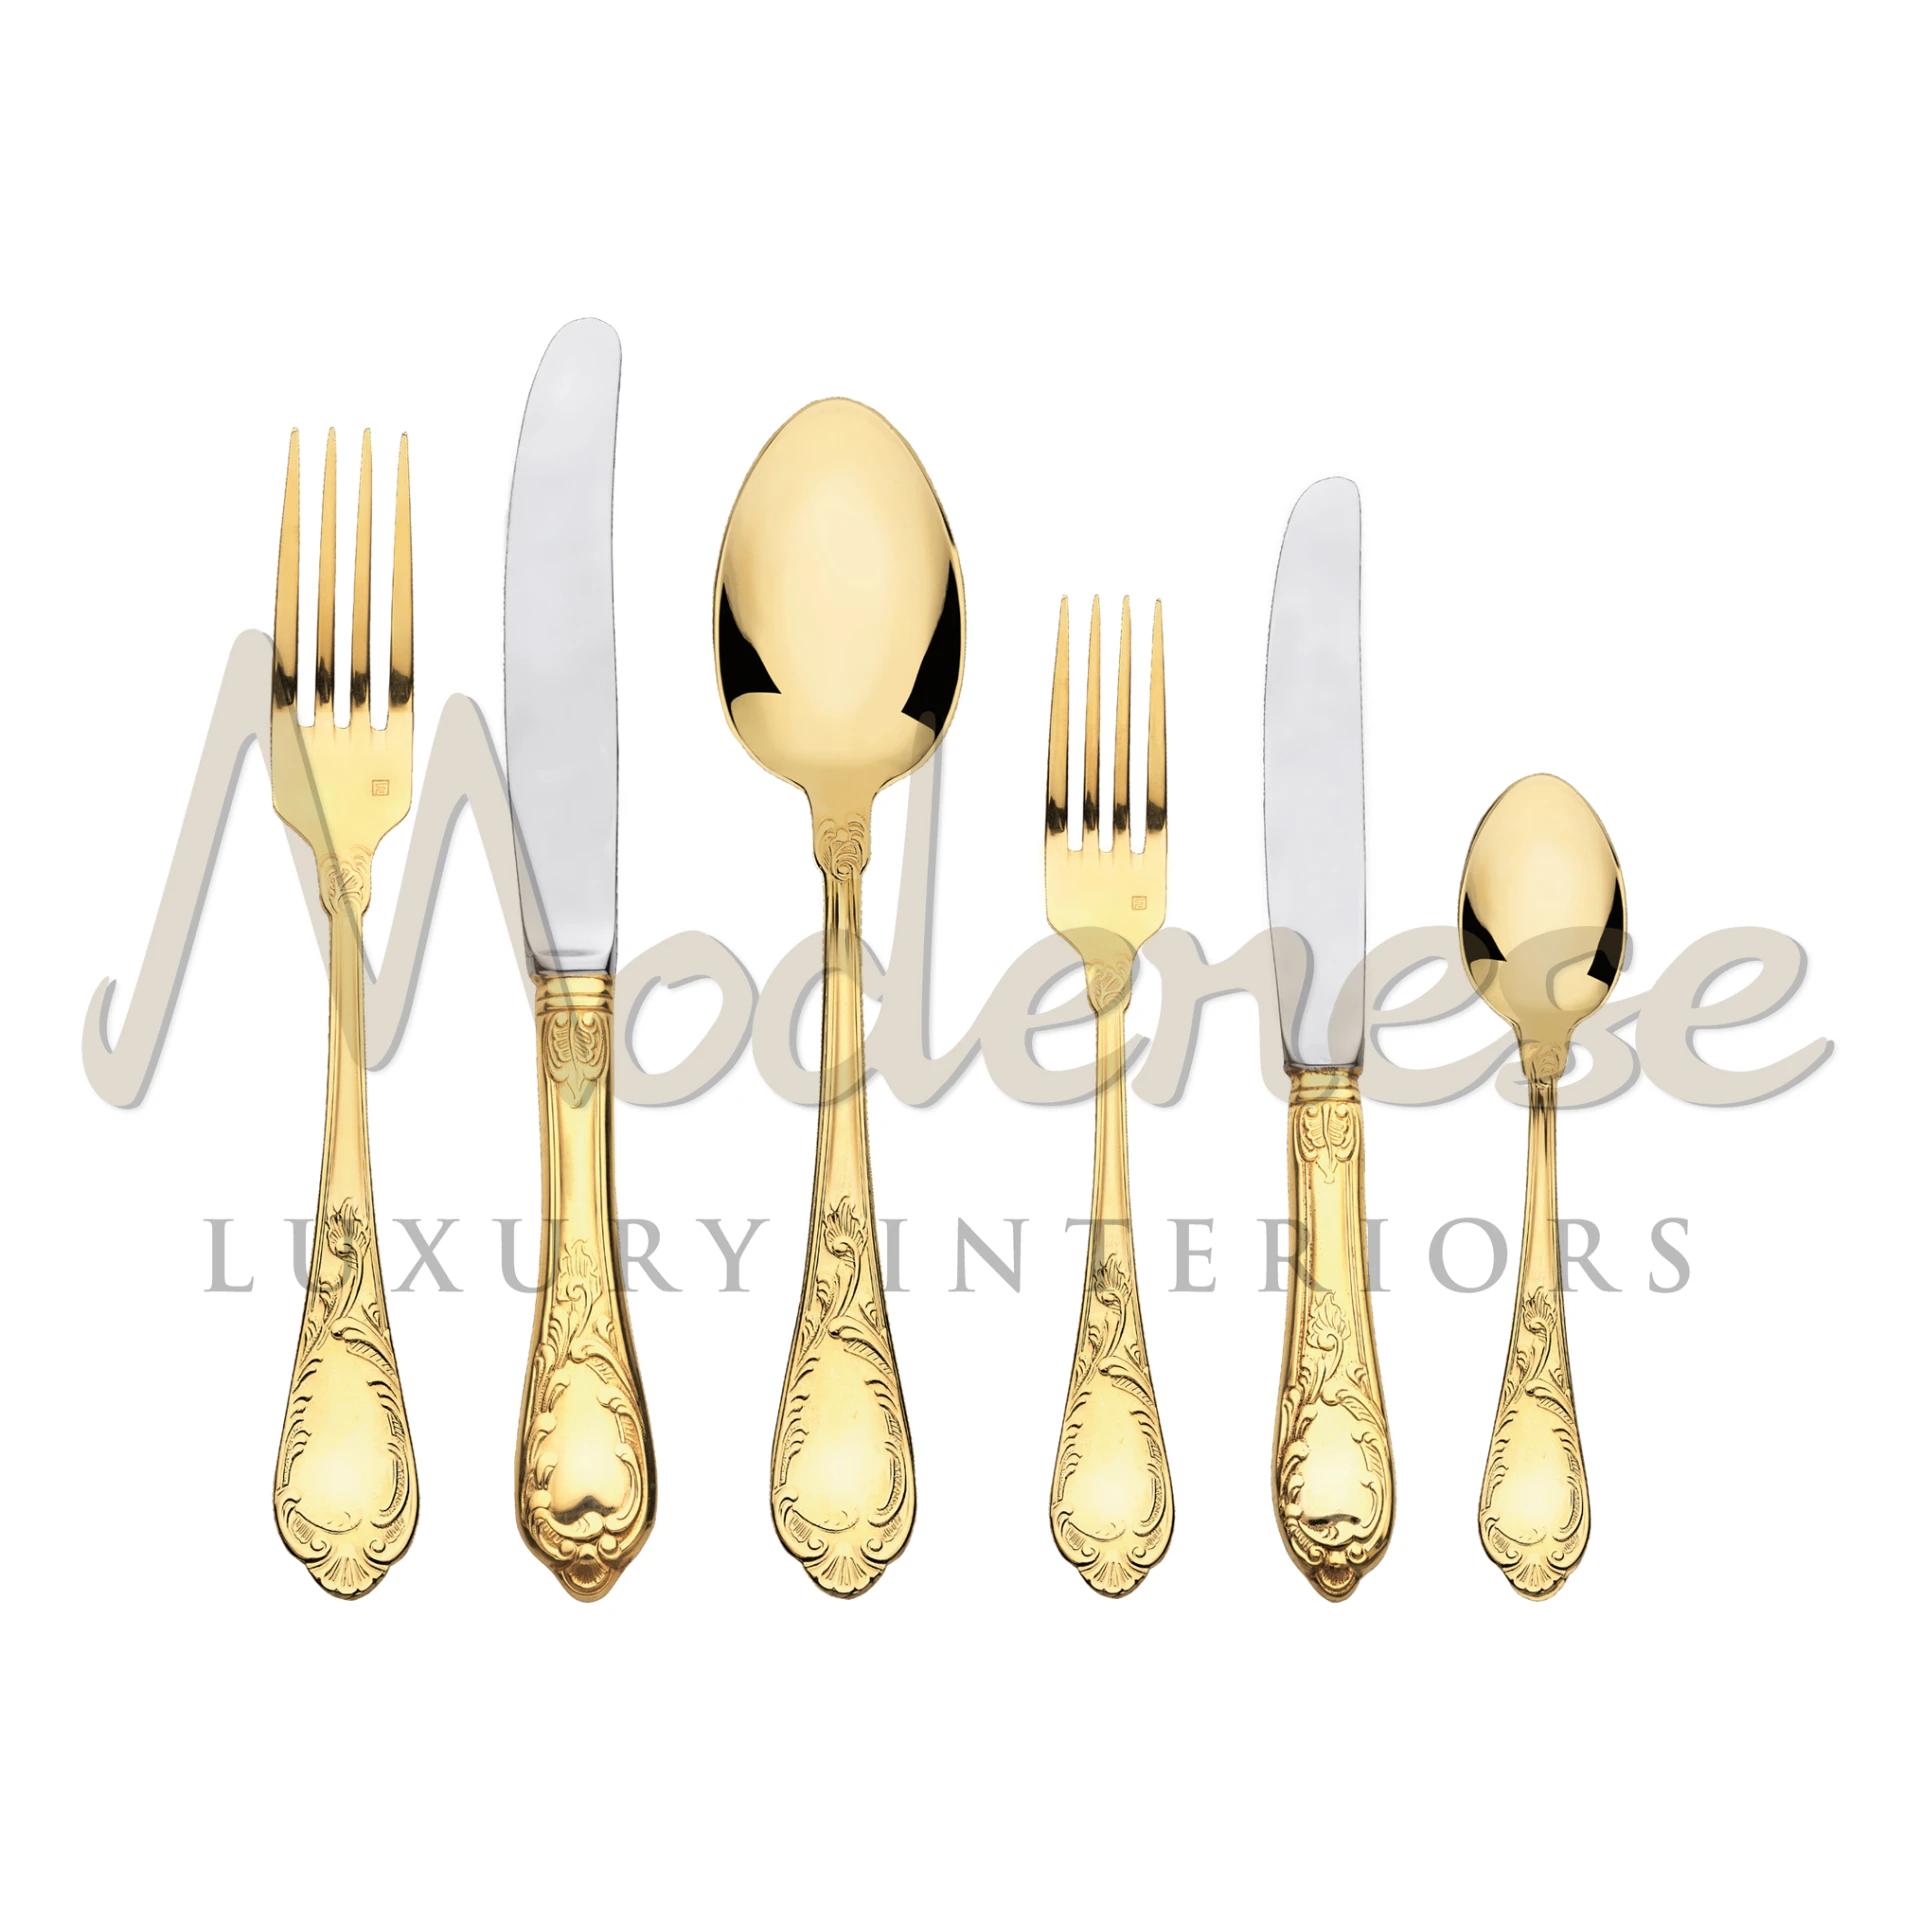 The Luxurious 'Inox & Gold' cutlery set with glossy golden finish and decorated handles